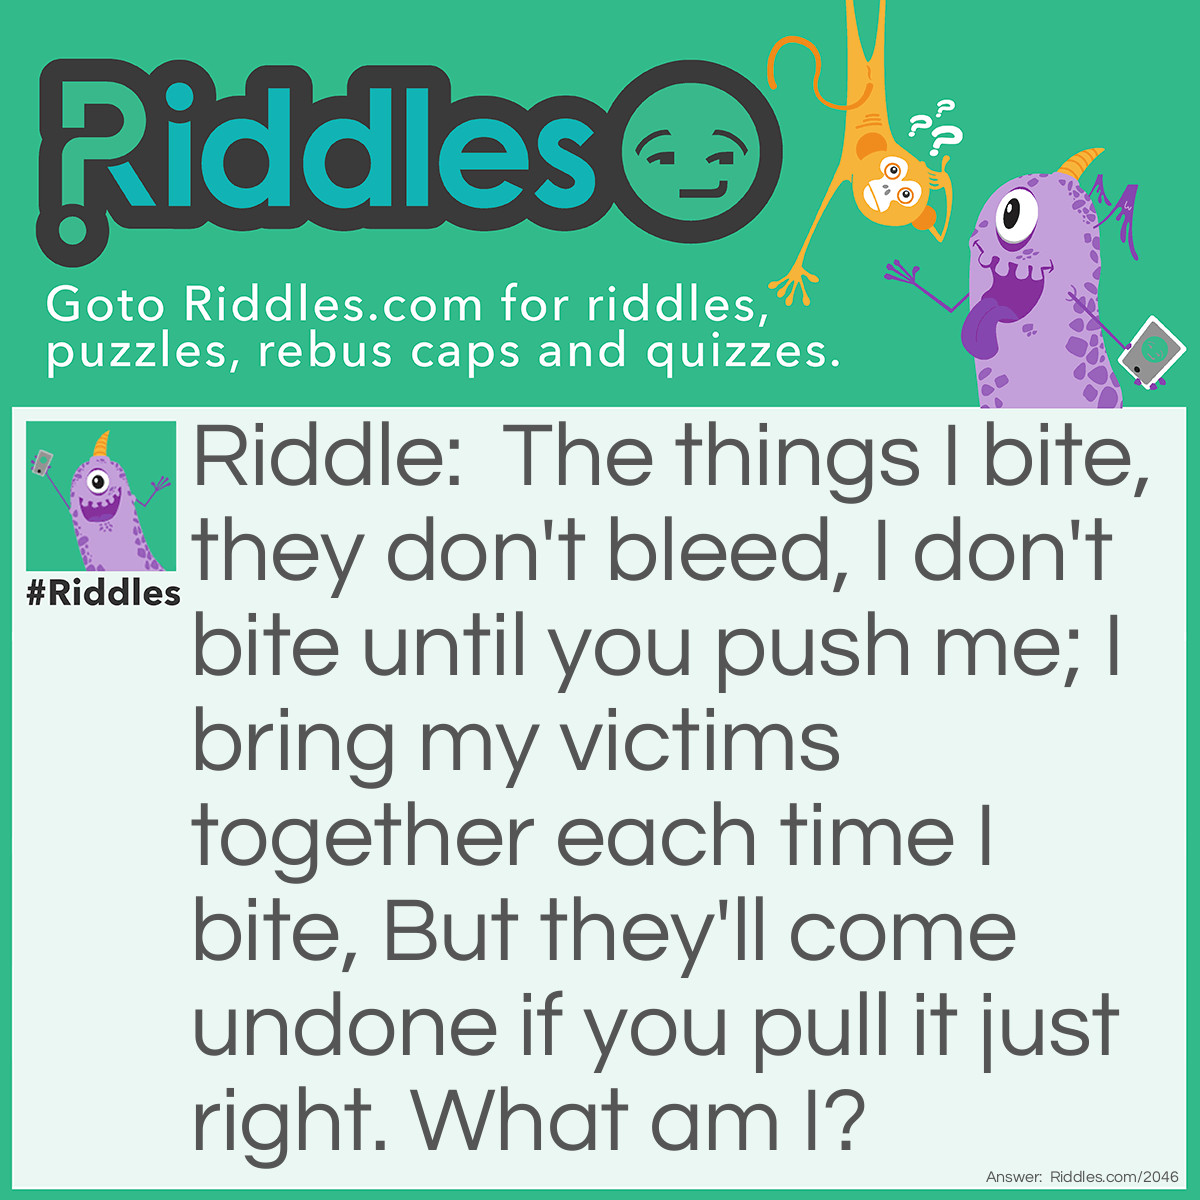 Riddle: The things I bite, they don't bleed, 
I don't bite until you push me; 
I bring my victims together each time I bite, 
But they'll come undone if you pull it just right. 
What am I? Answer: A Stapler.